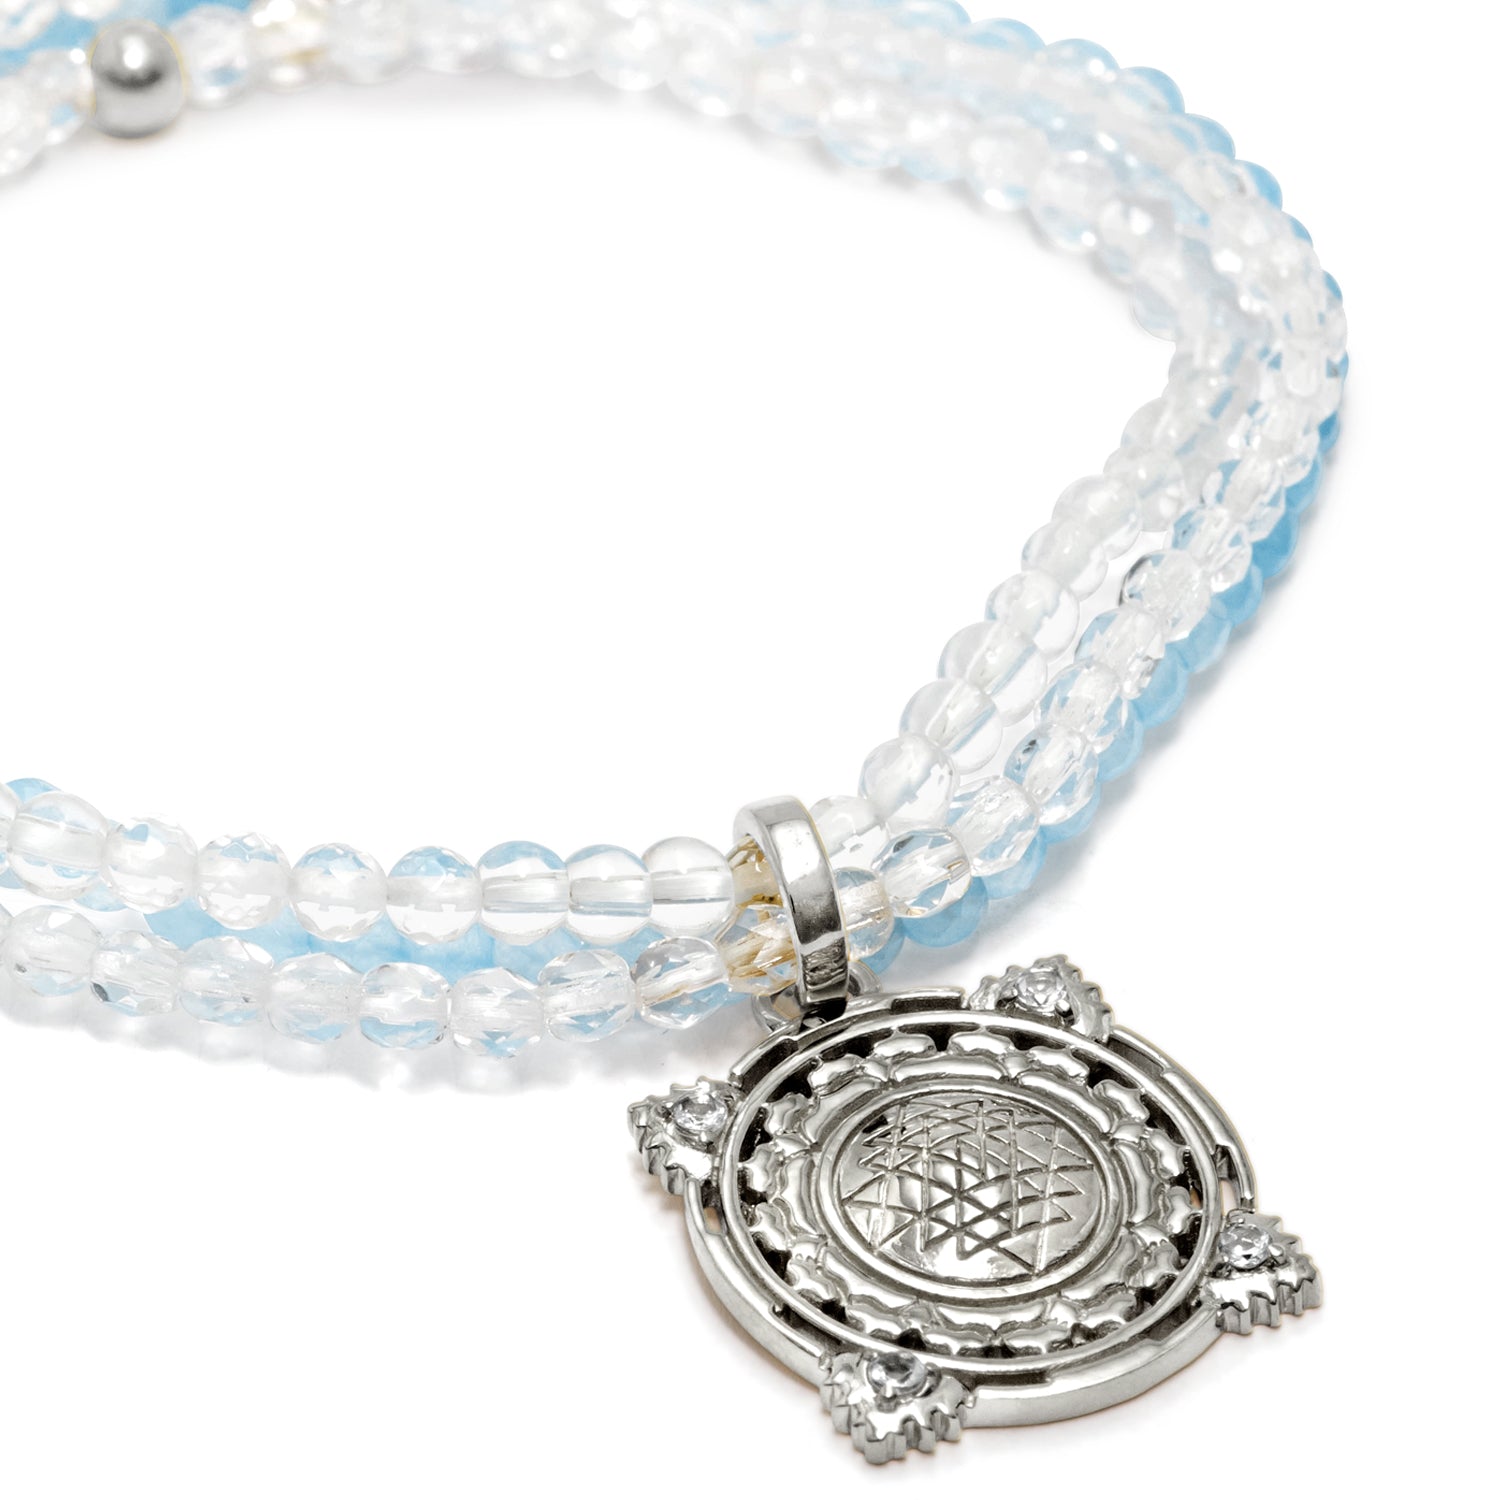 Sri Yantra gemstone bracelet with aquamarines and sterling silver from ETERNAL BLISS - Spiritual jewelry